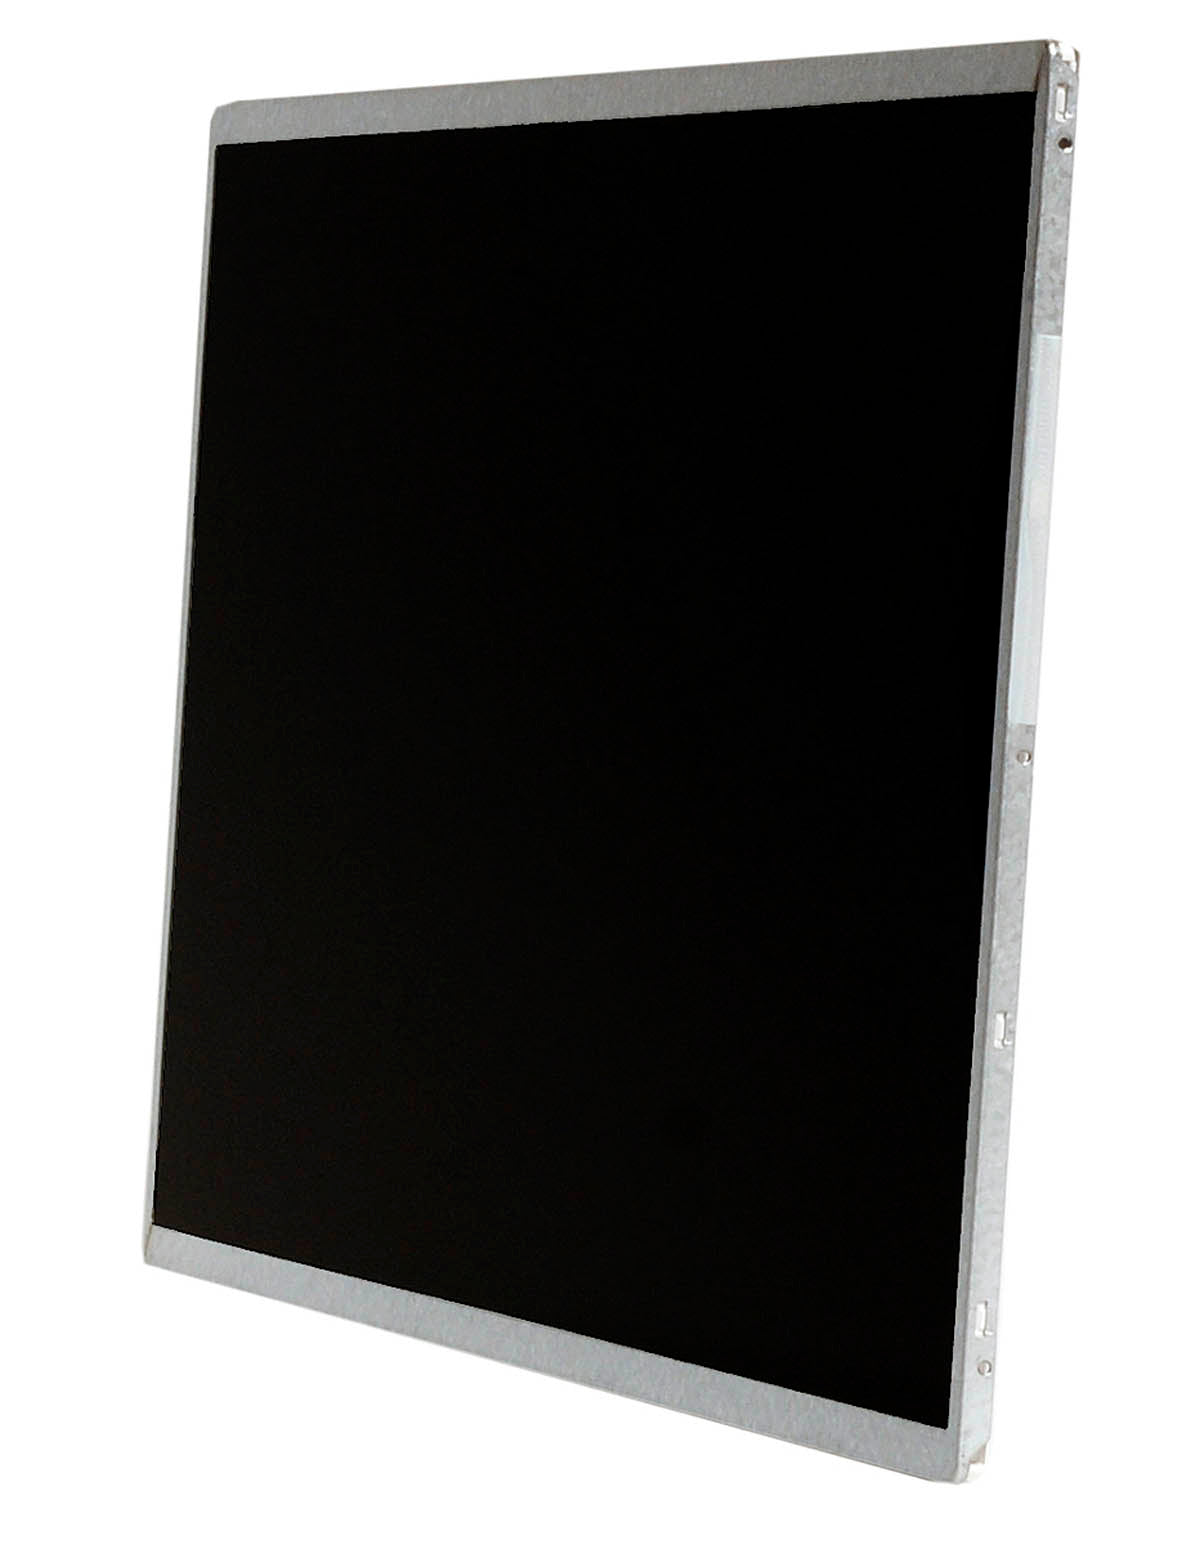 Replacement Screen For LTN140AT22-C01 HD 1366x768 Glossy LCD LED Display